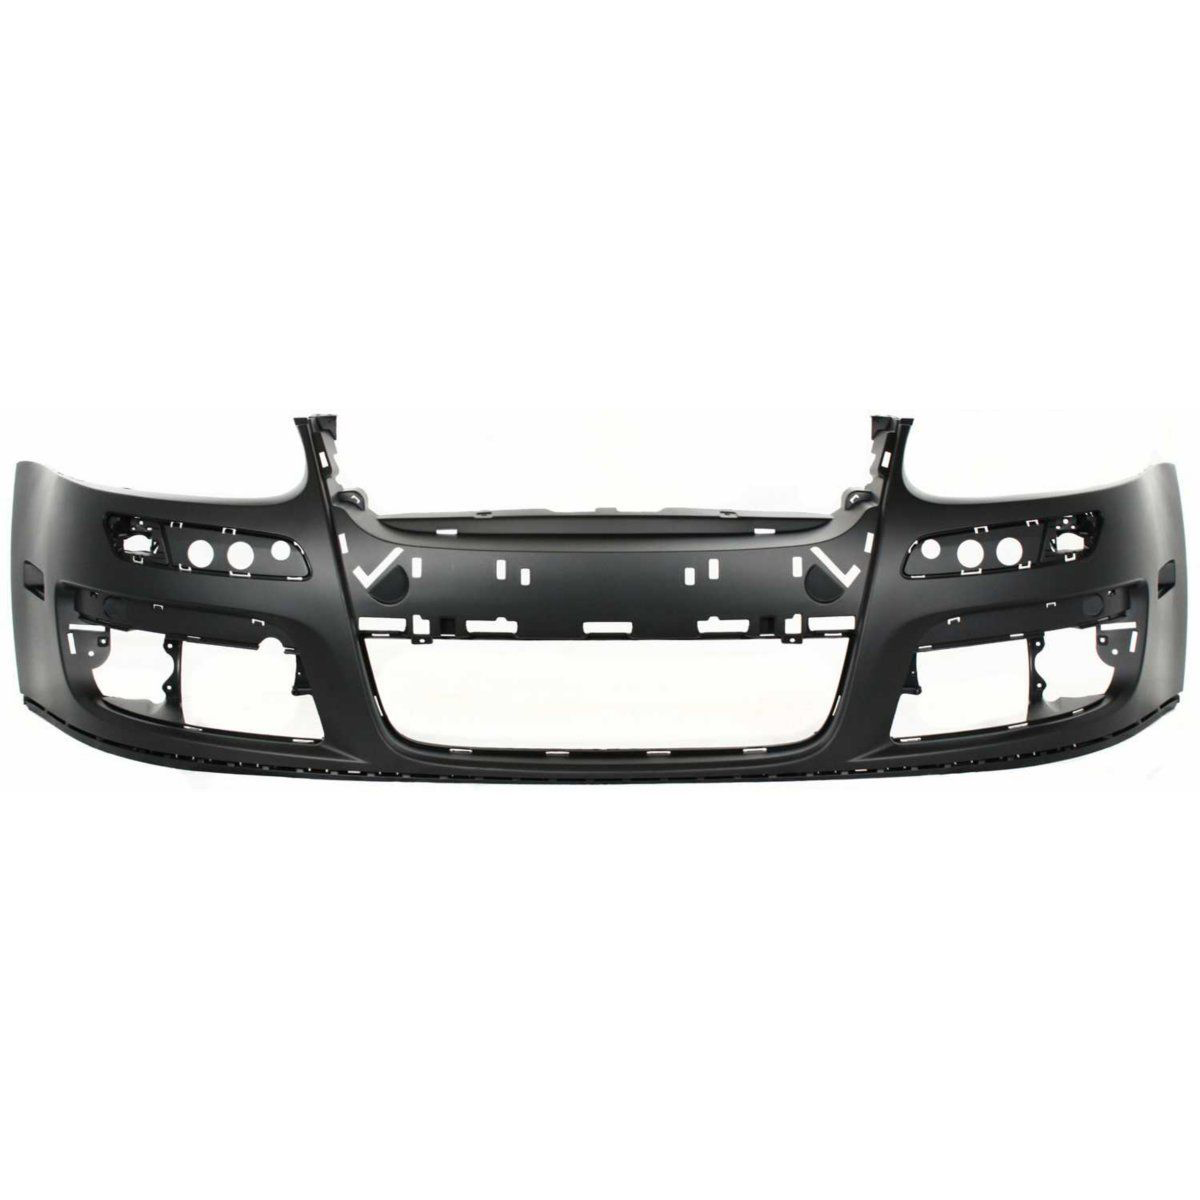 2005-2010 VOLKSWAGEN JETTA Front Bumper Cover Type 5  Sedan Painted to Match